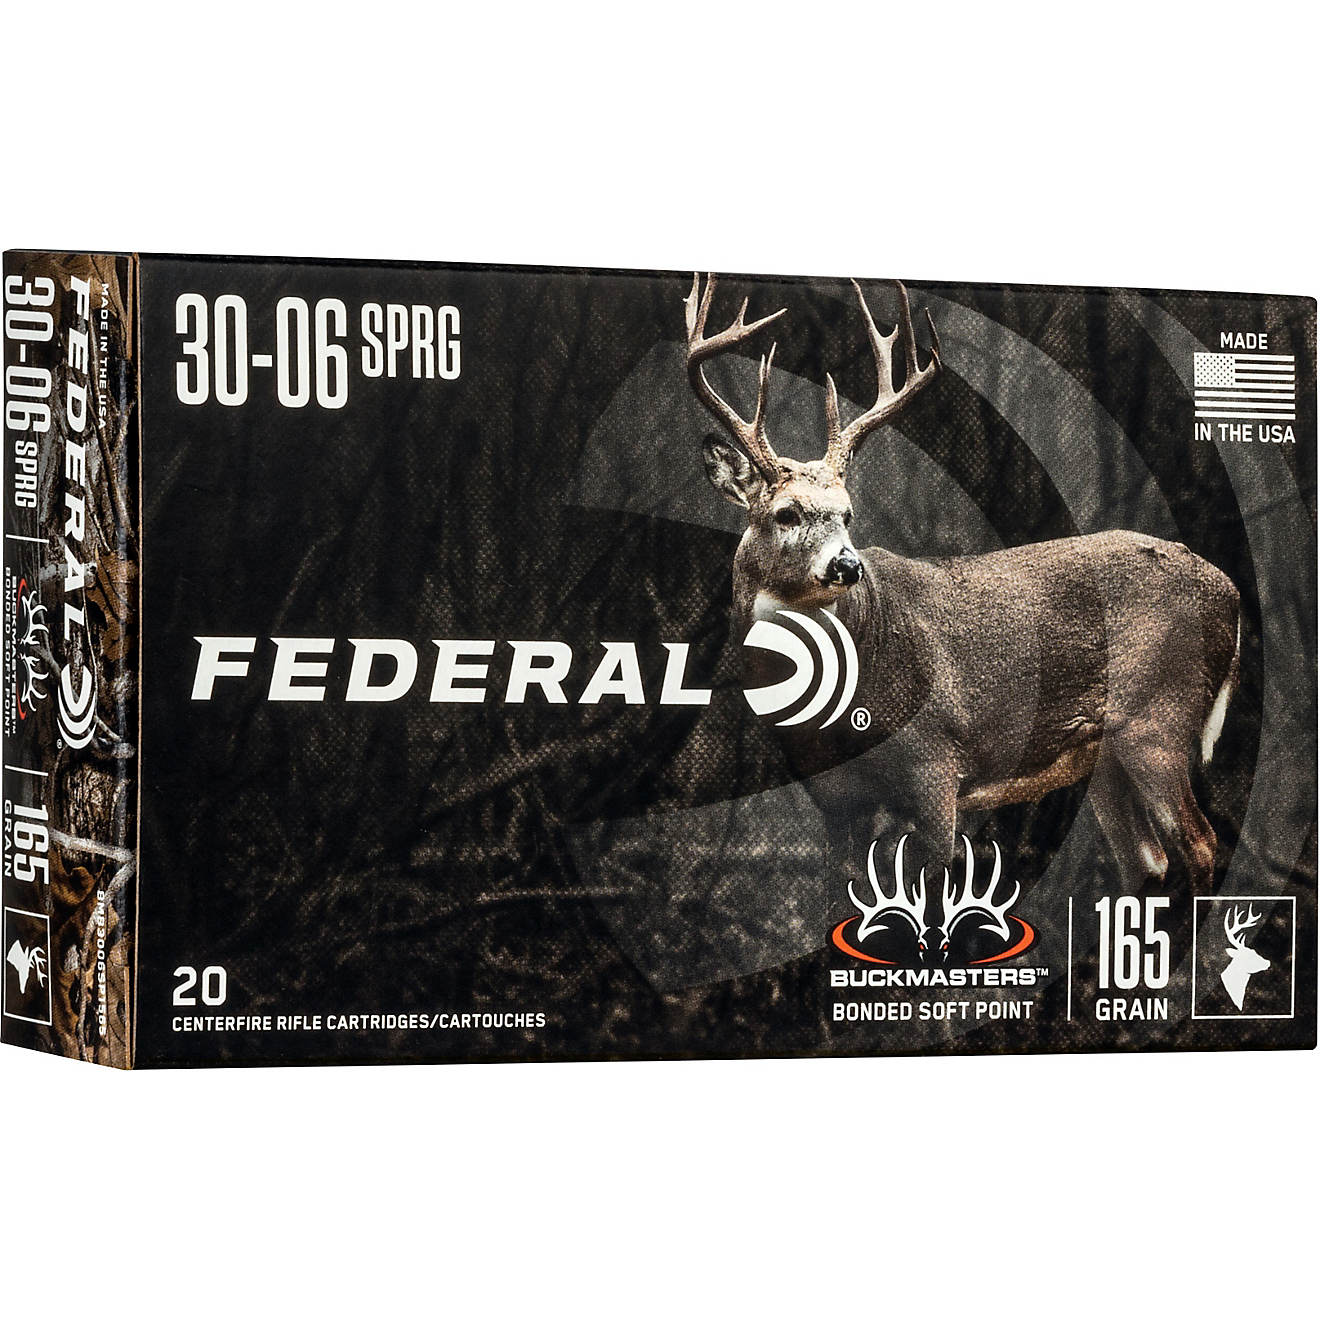 Federal Premium Buckmasters Bonded Soft Point .30-06 Springfield Centerfire Rifle Ammunition - 20 Rounds                         - view number 1